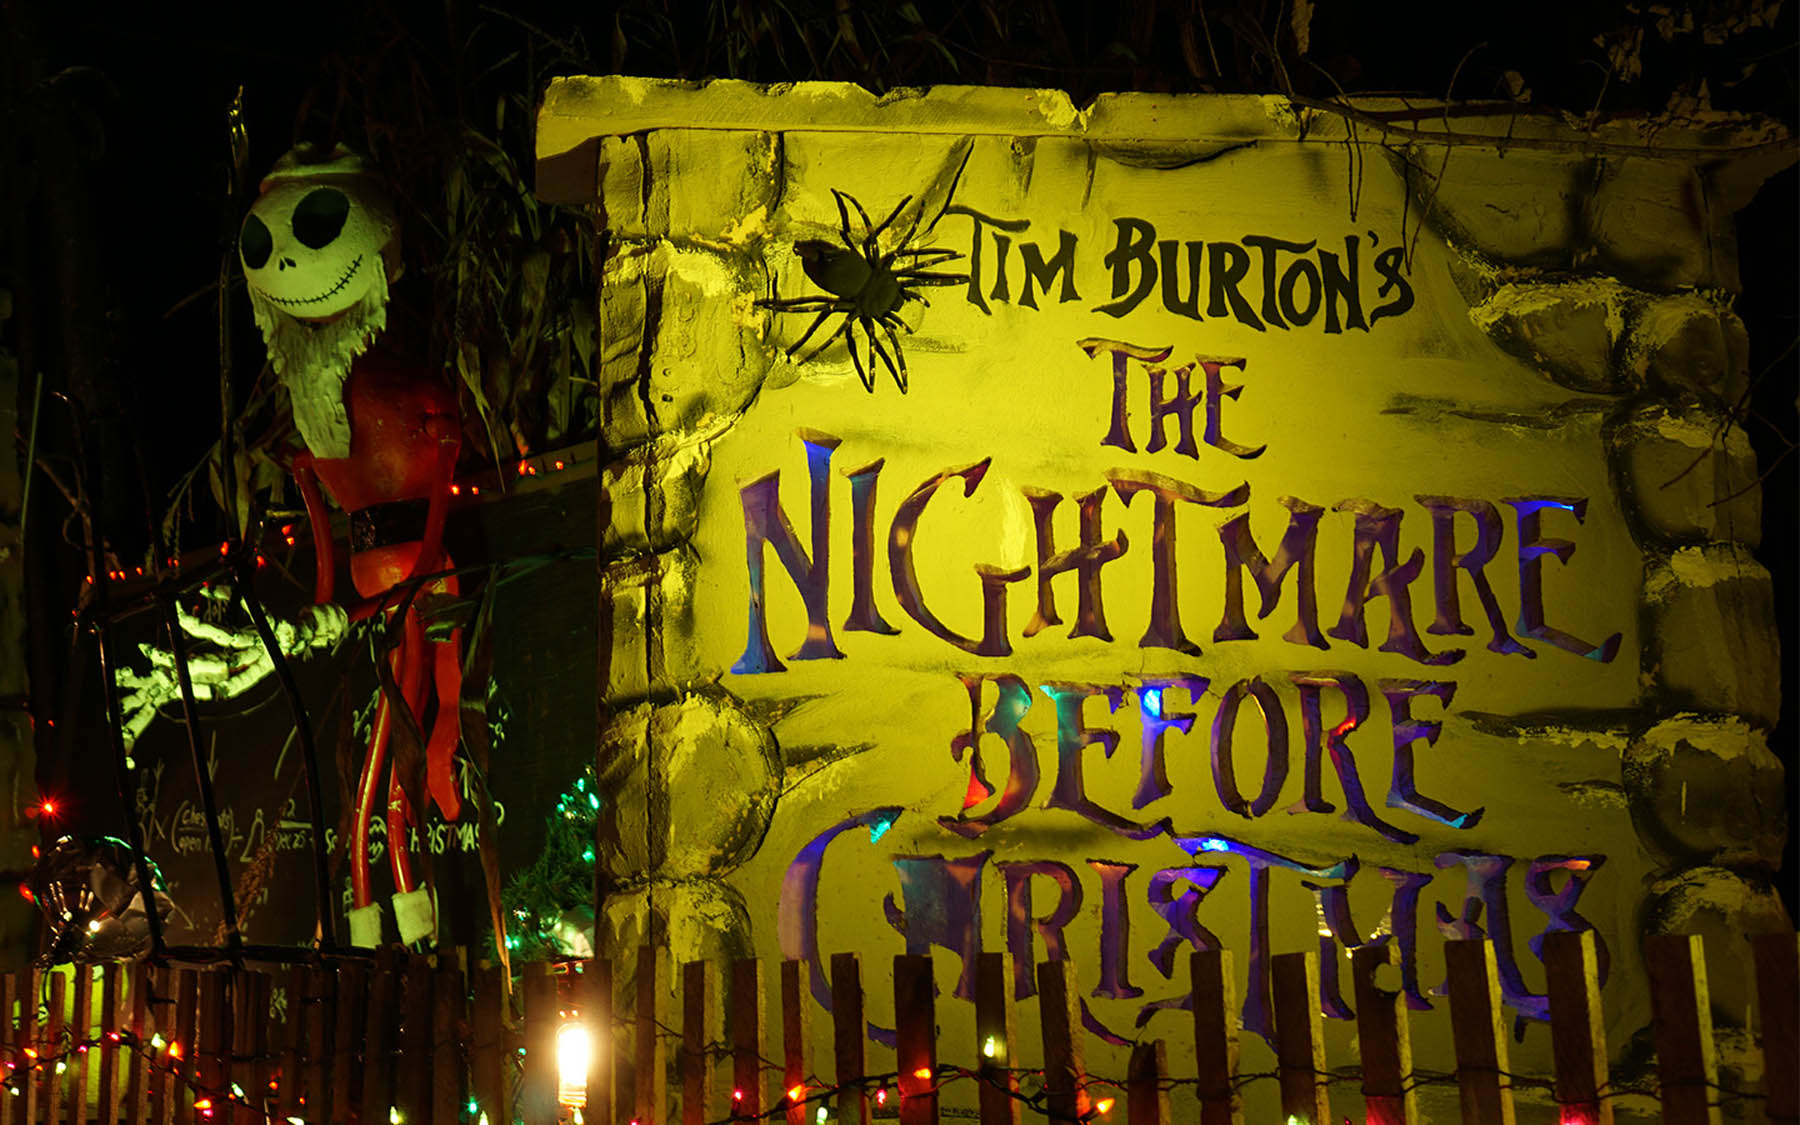 Jack Skellington statue and sign. Text: The Nightmare Before Christmas.